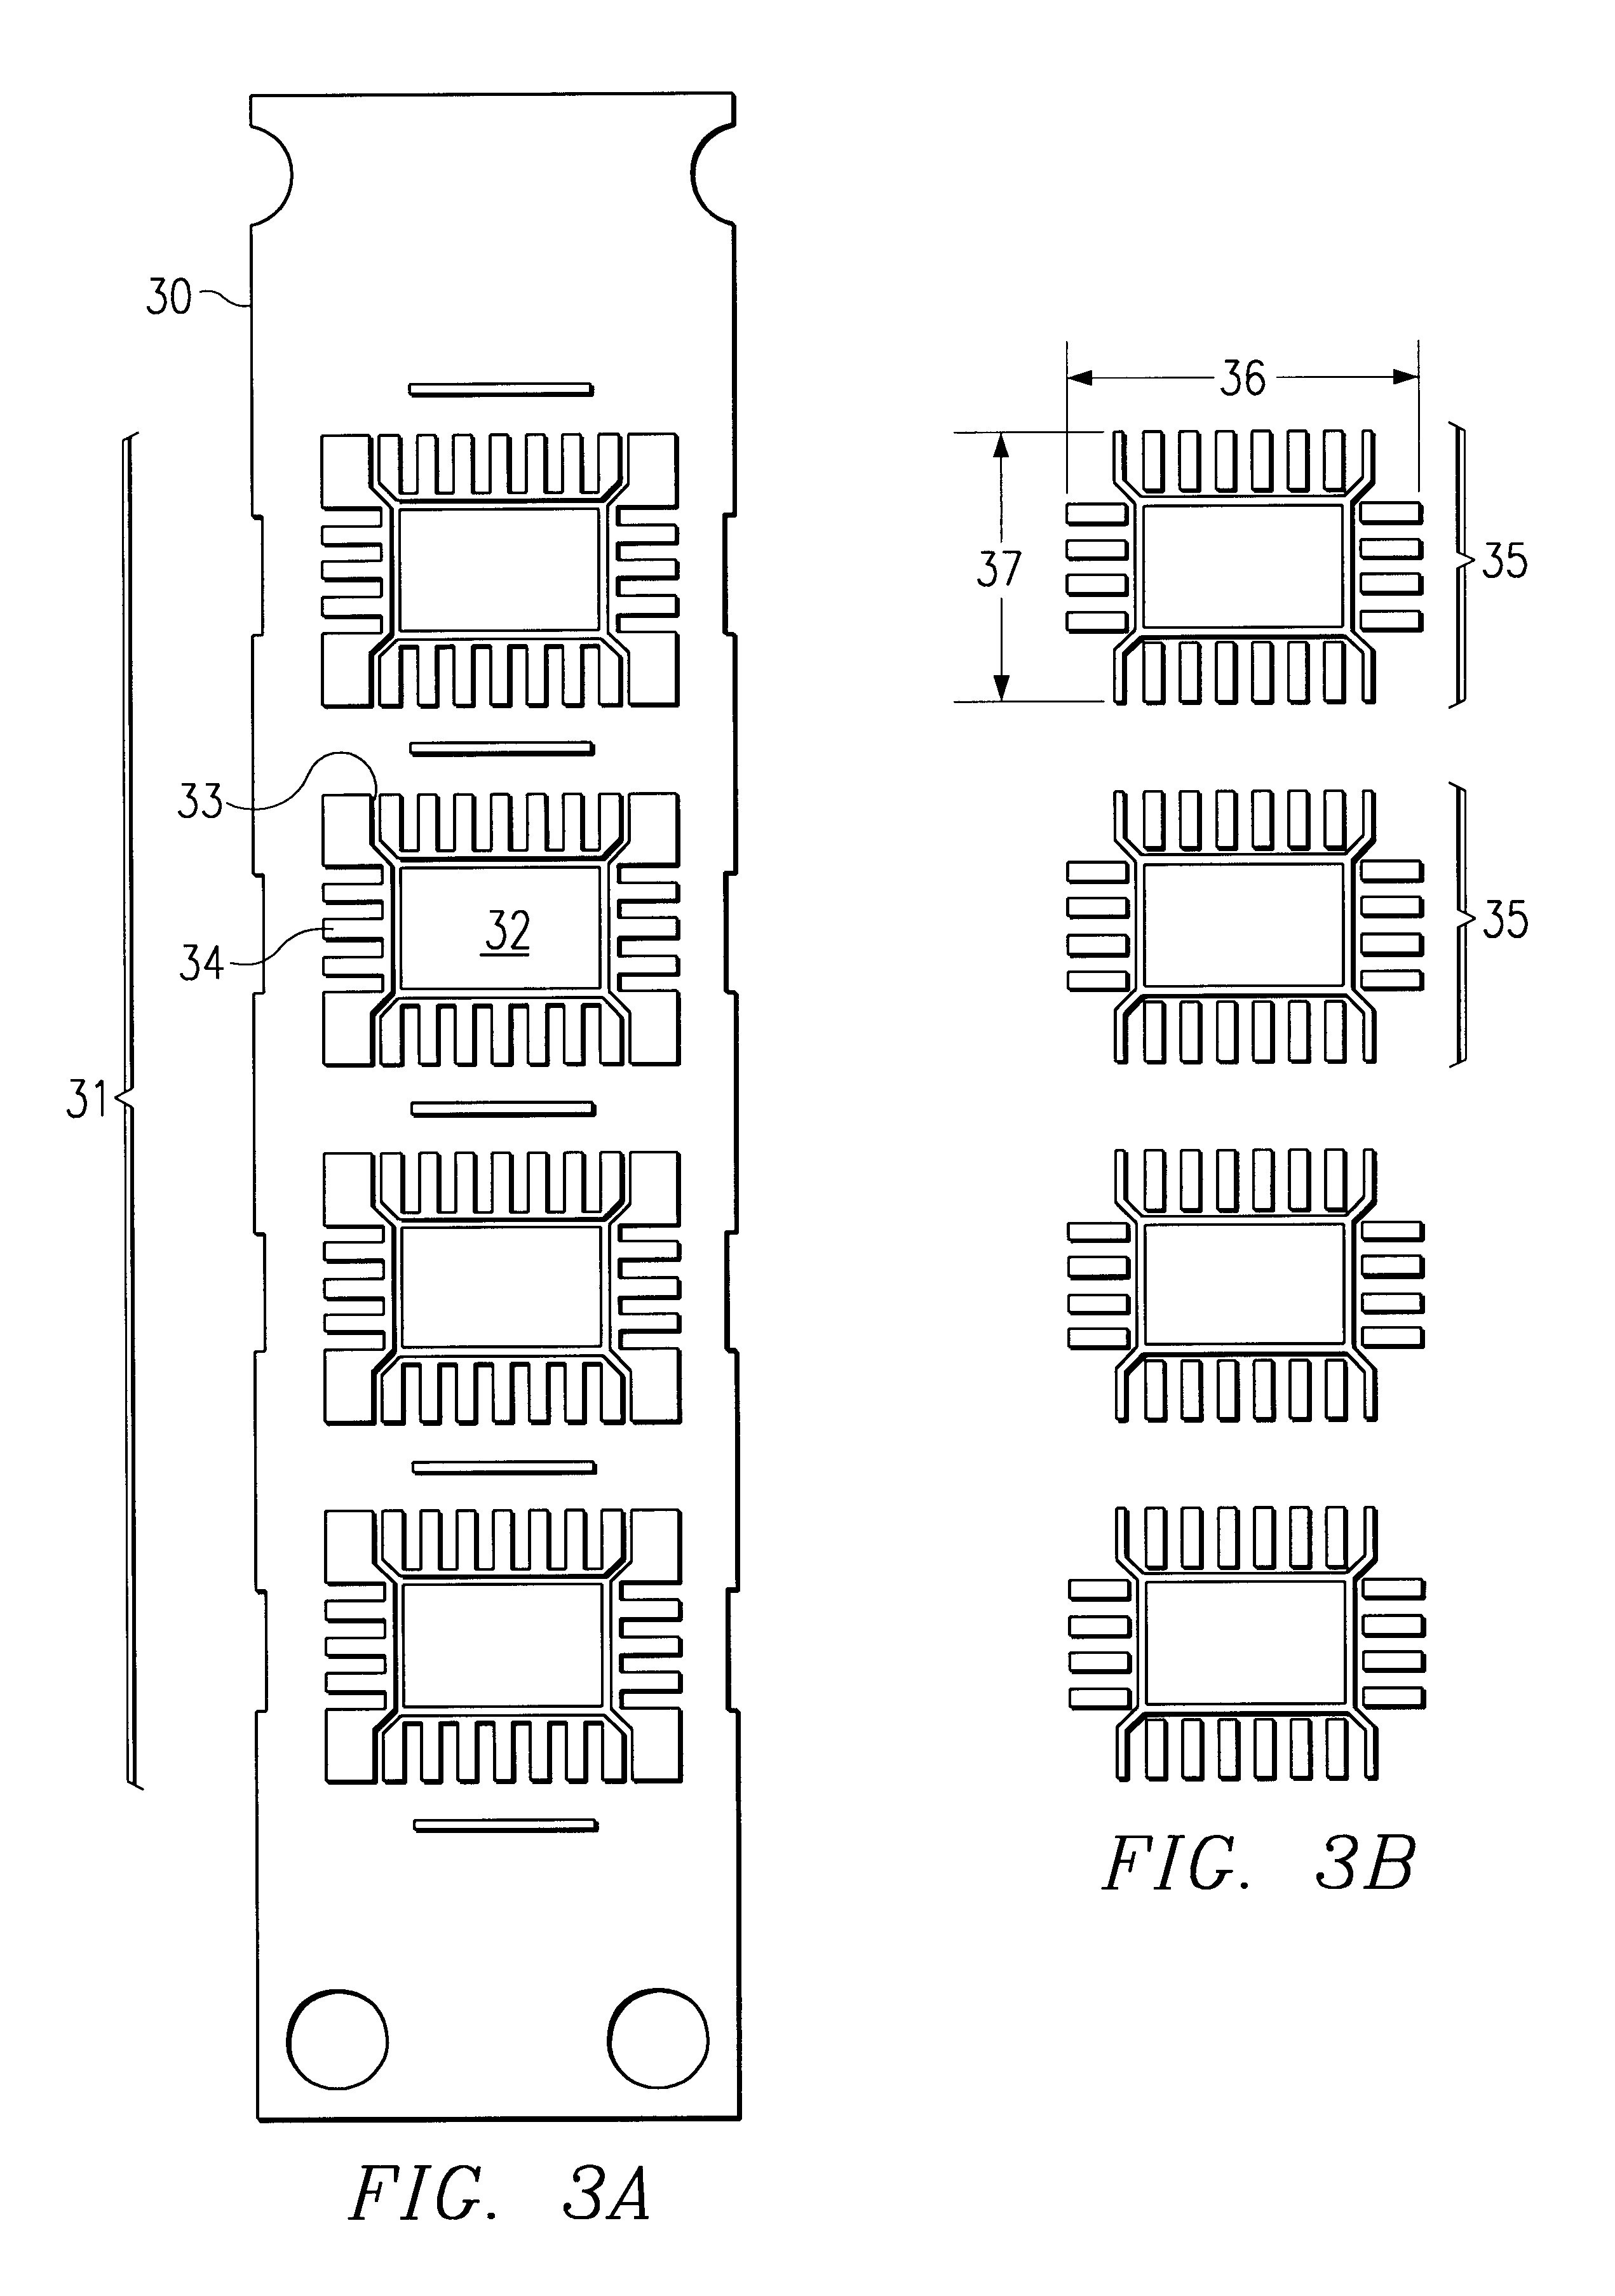 Preplating of semiconductor small outline no-lead leadframes